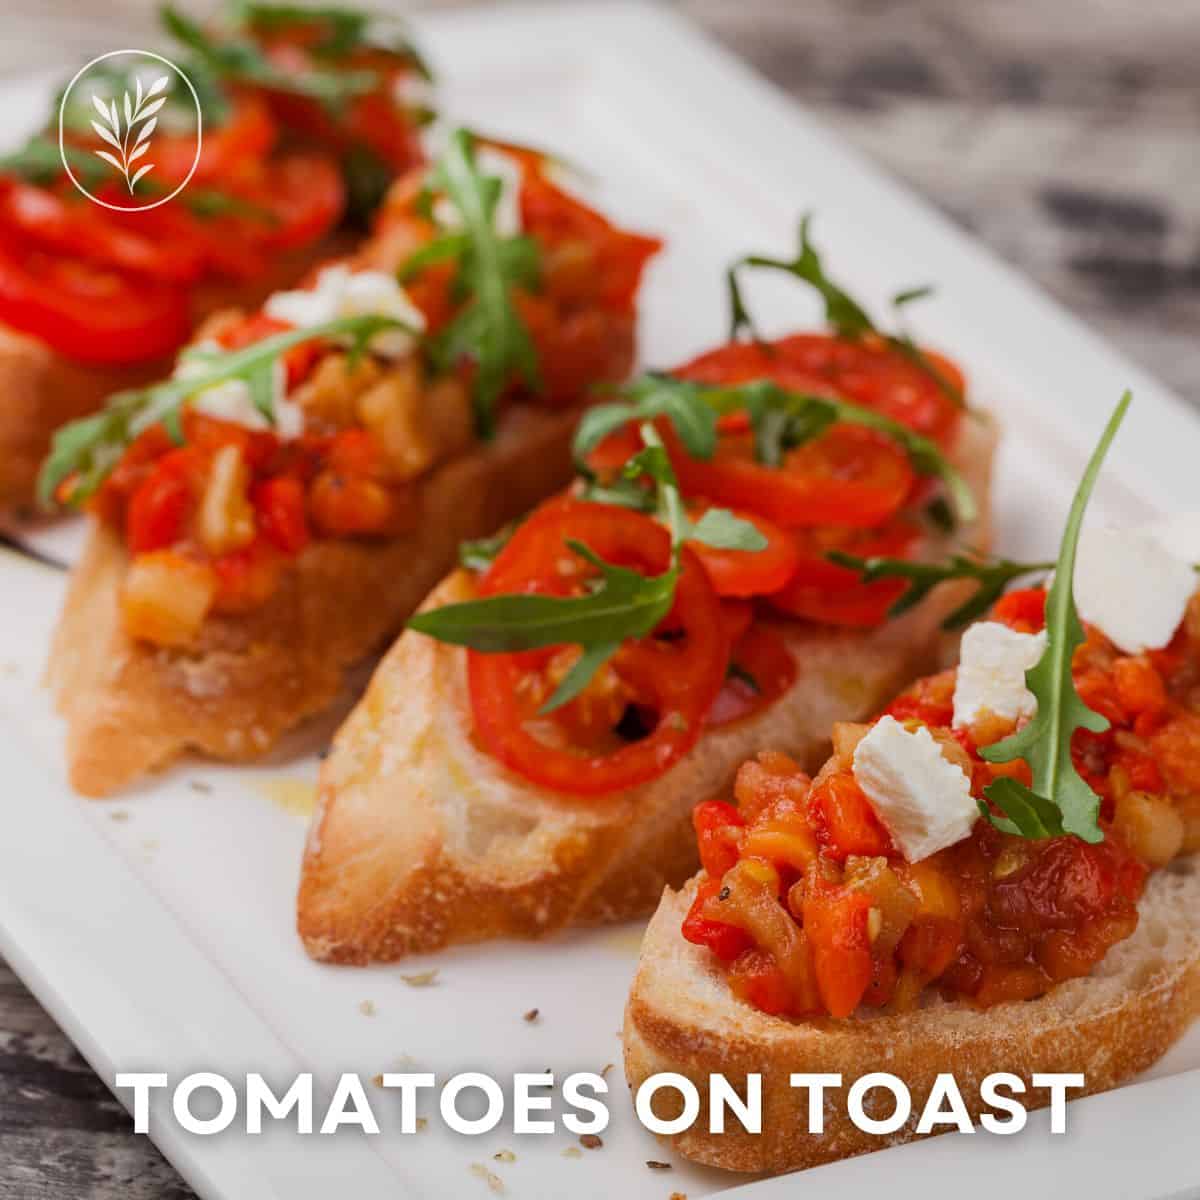 Done well, heirloom tomatoes on toast can taste like candy. The best tomato toast i've ever had was when the tomatoes are still warm from the garden. It sounds weird, but trust me, tomatoes on toast are harvest season's most delicious treat! Via @home4theharvest